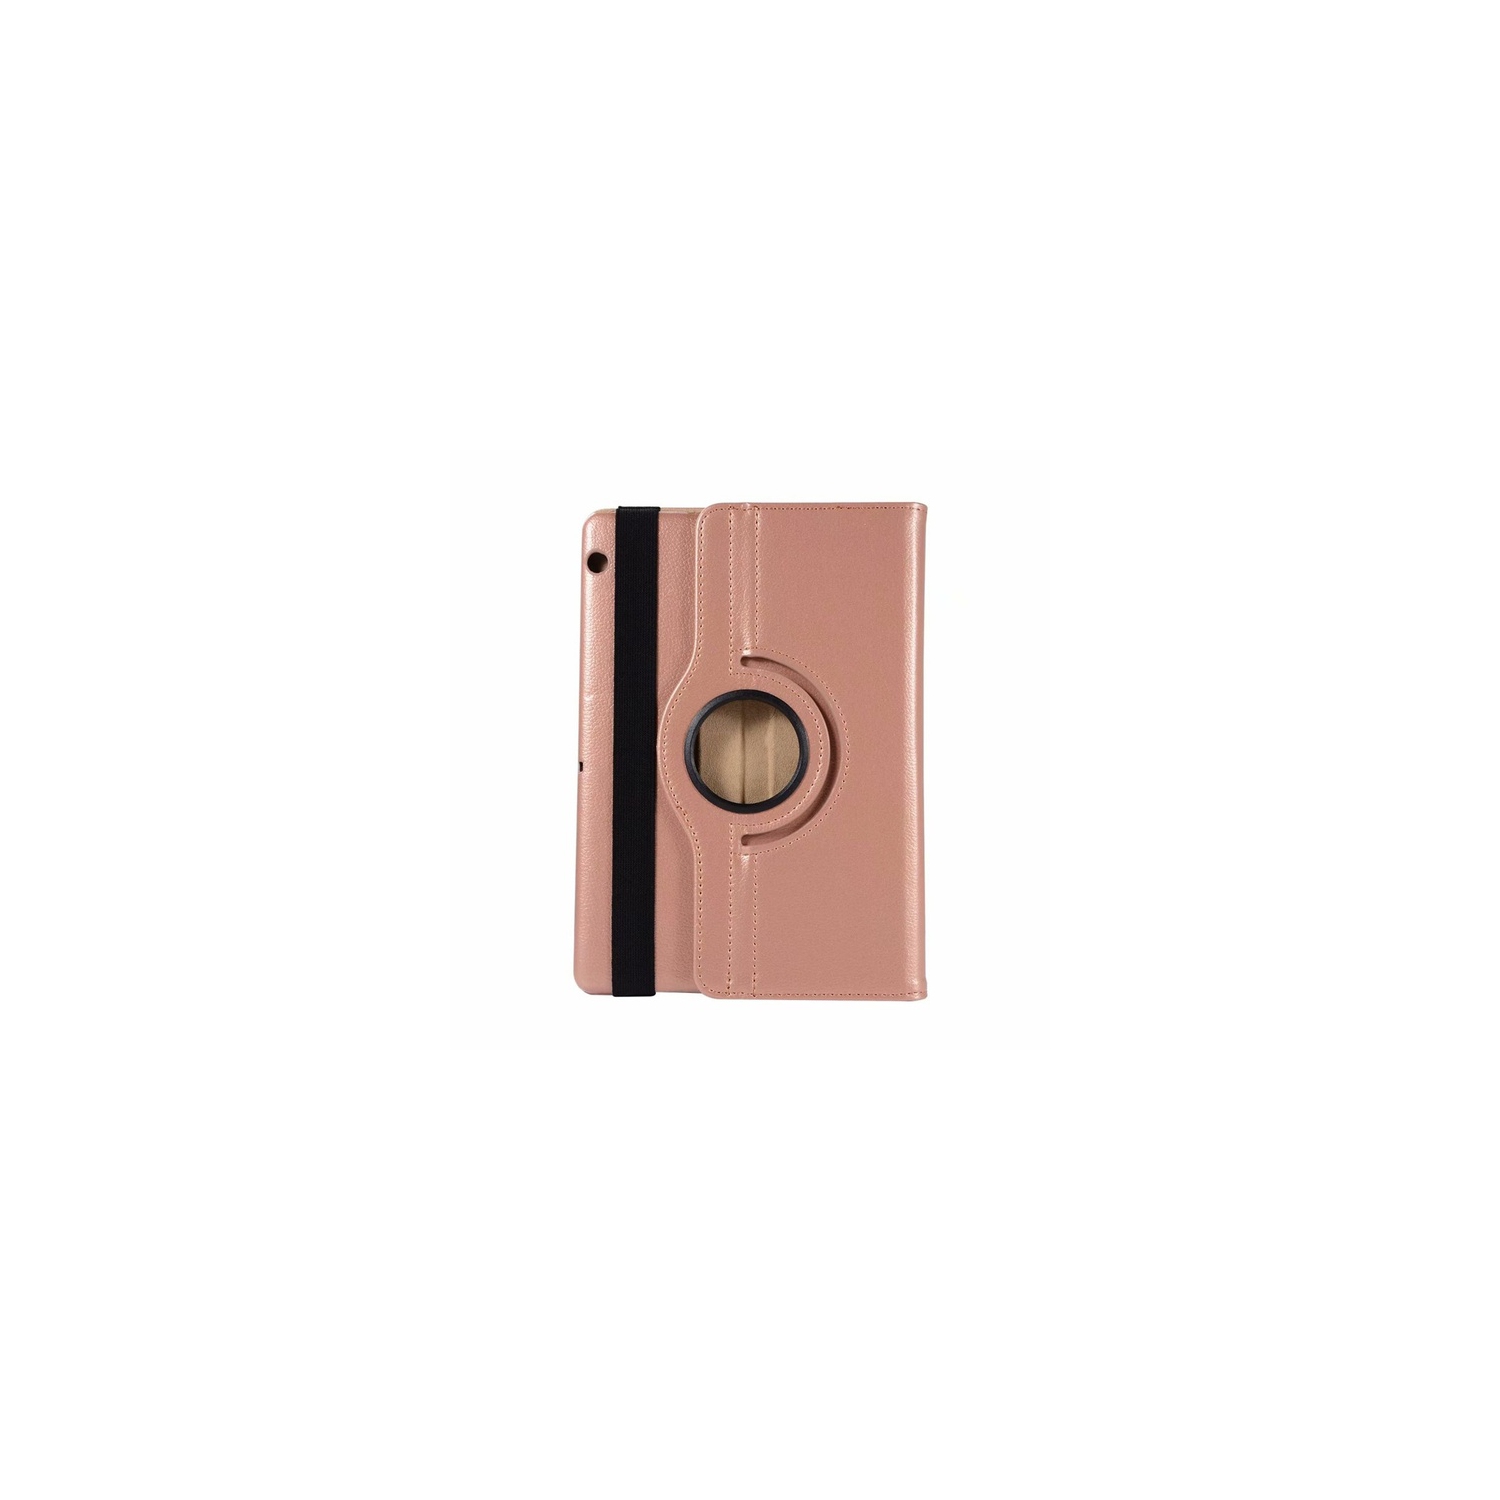 [CC] 360 Degree Rotating Tablet Case Cover For Huawei MediaPad T5, Rose Gold